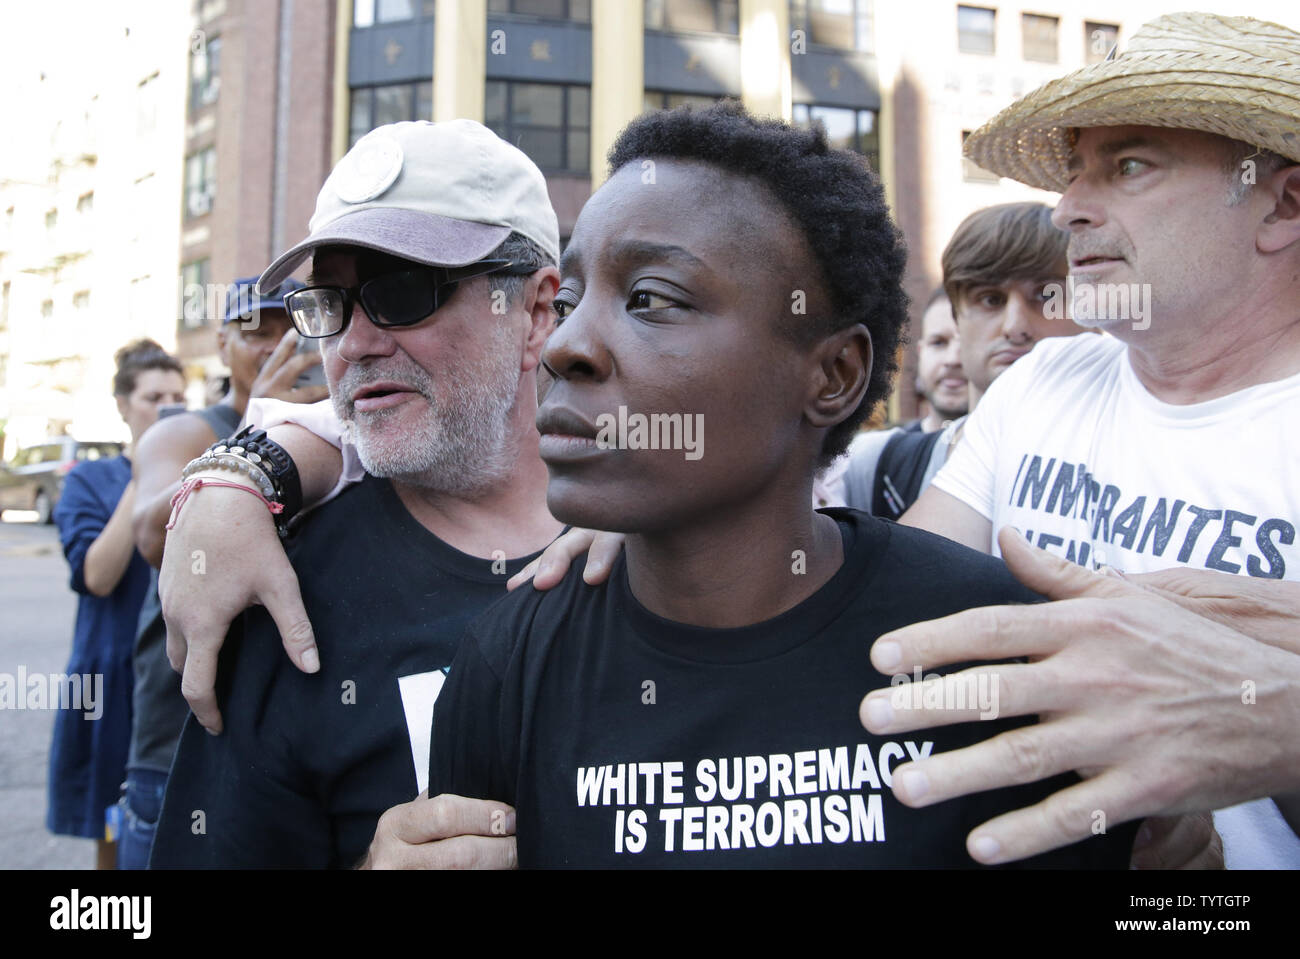 Statue Of Liberty climber and Rise and Resist protester Therese Okoumou exits Court with supporters in New York City on July 5, 2018 in New York City. The woman who partially climbed up the Statue of Liberty on July 4th Independence Day and prompted authorities to evacuate Liberty Island was released without bail, and if convicted would face up to six months behind bars.    Photo by John Angelillo/UPI Stock Photo